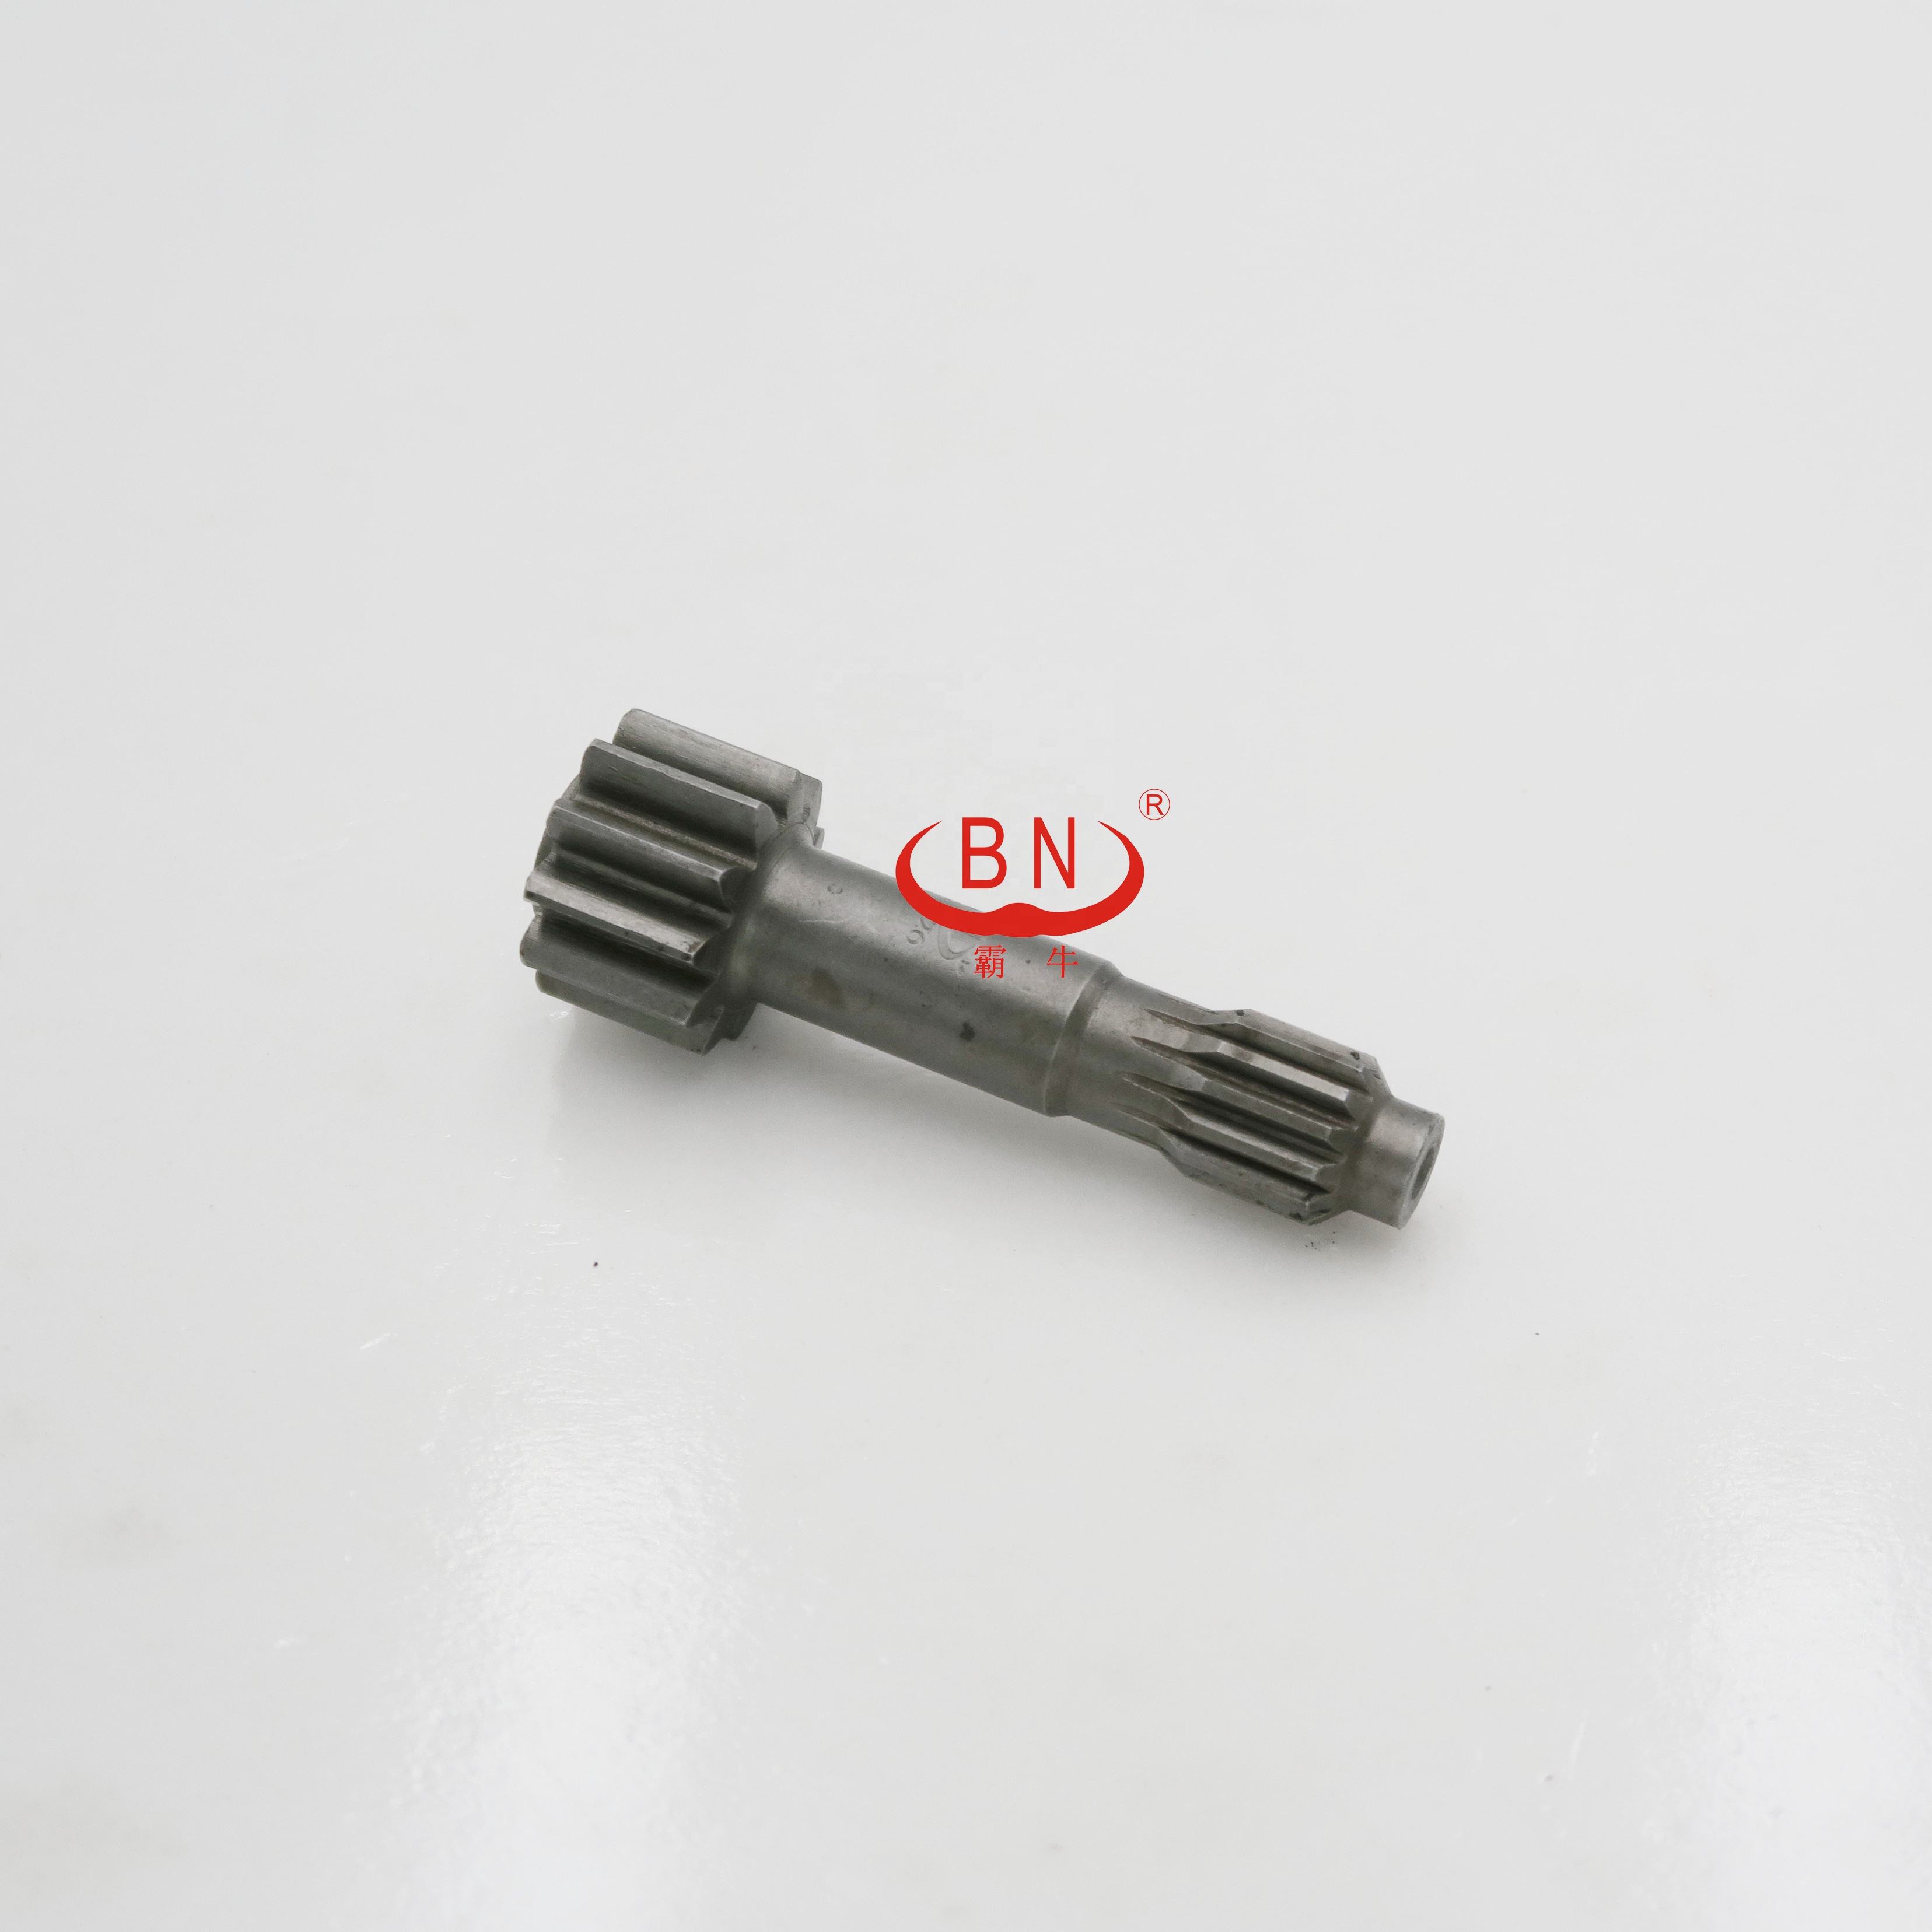 AX30-2 Construction Machinery Parts Transmission Gear Mini Travel 1st Prop Shaft for airman AX30-2